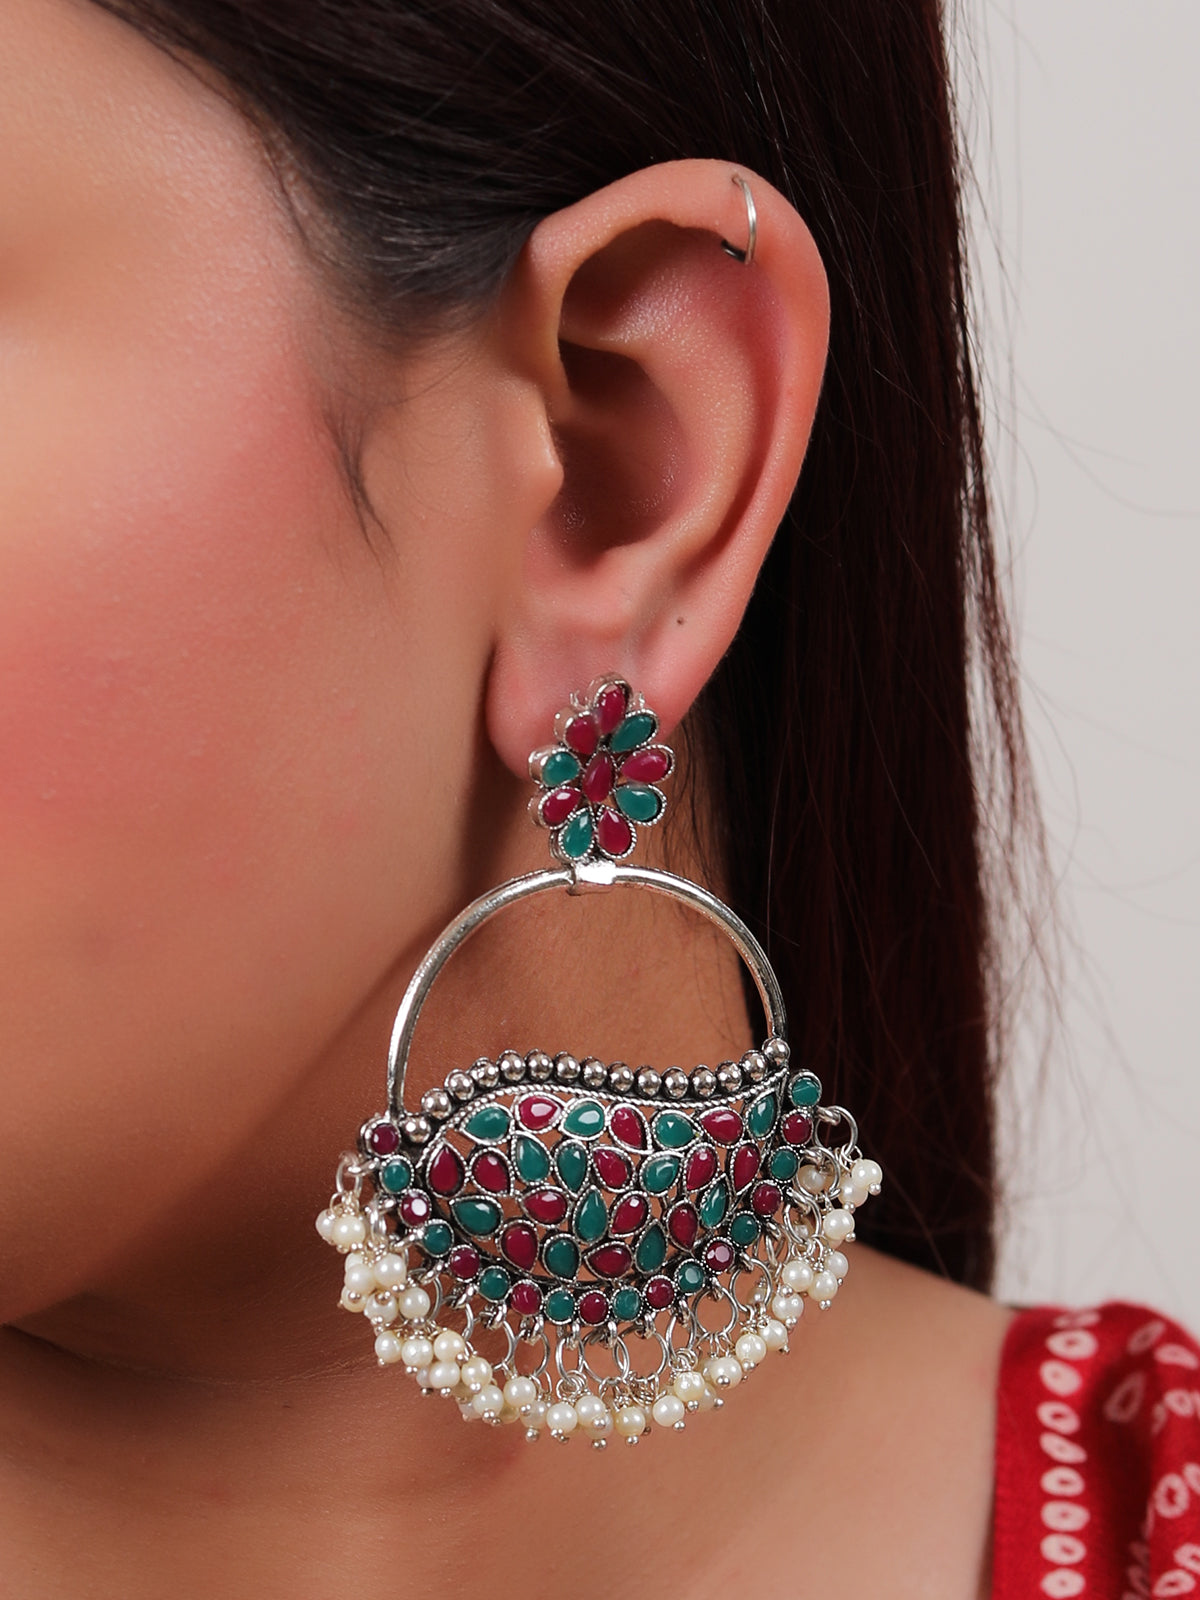 Multi-Color Rhinestones Embedded Circular Dangler Earring with White Beads Detailing